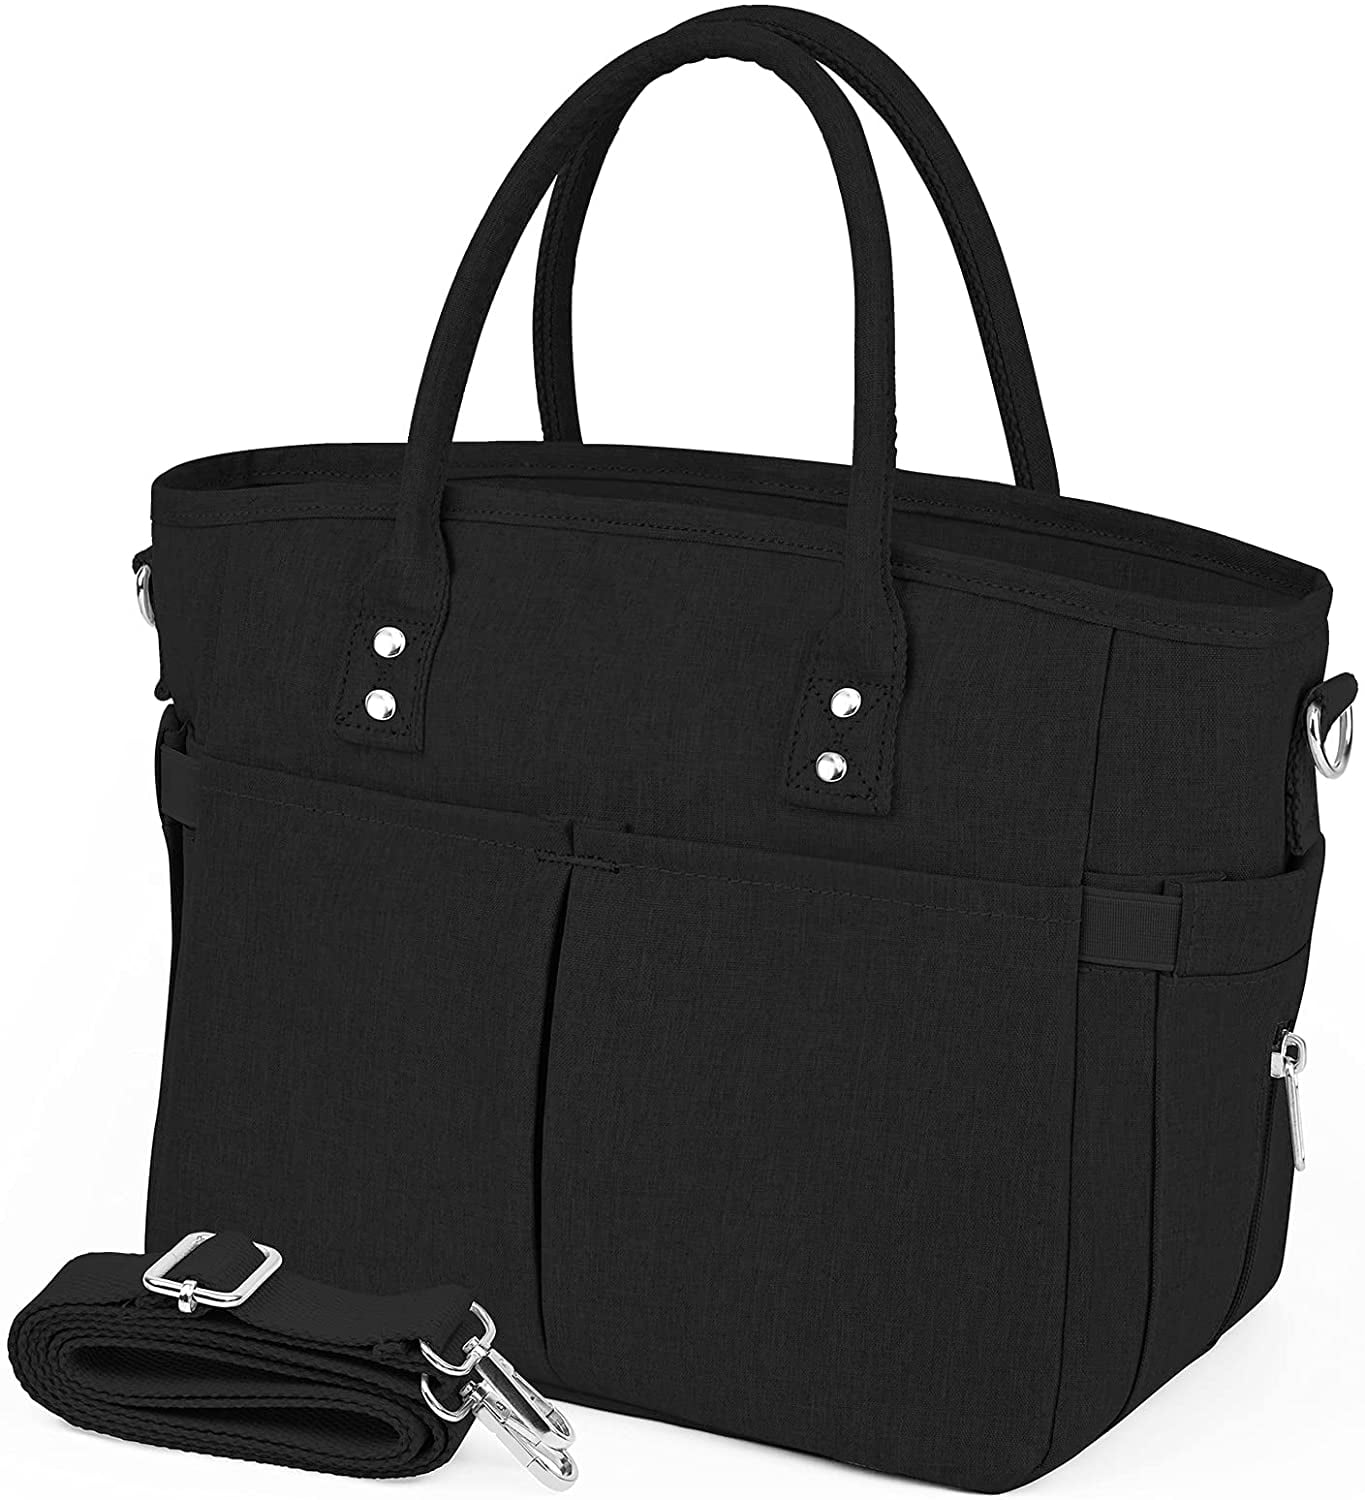 Aterod Original Lunch Box Insulated Lunch Bag Men Lunch Bags for Women Dark Gray Adults